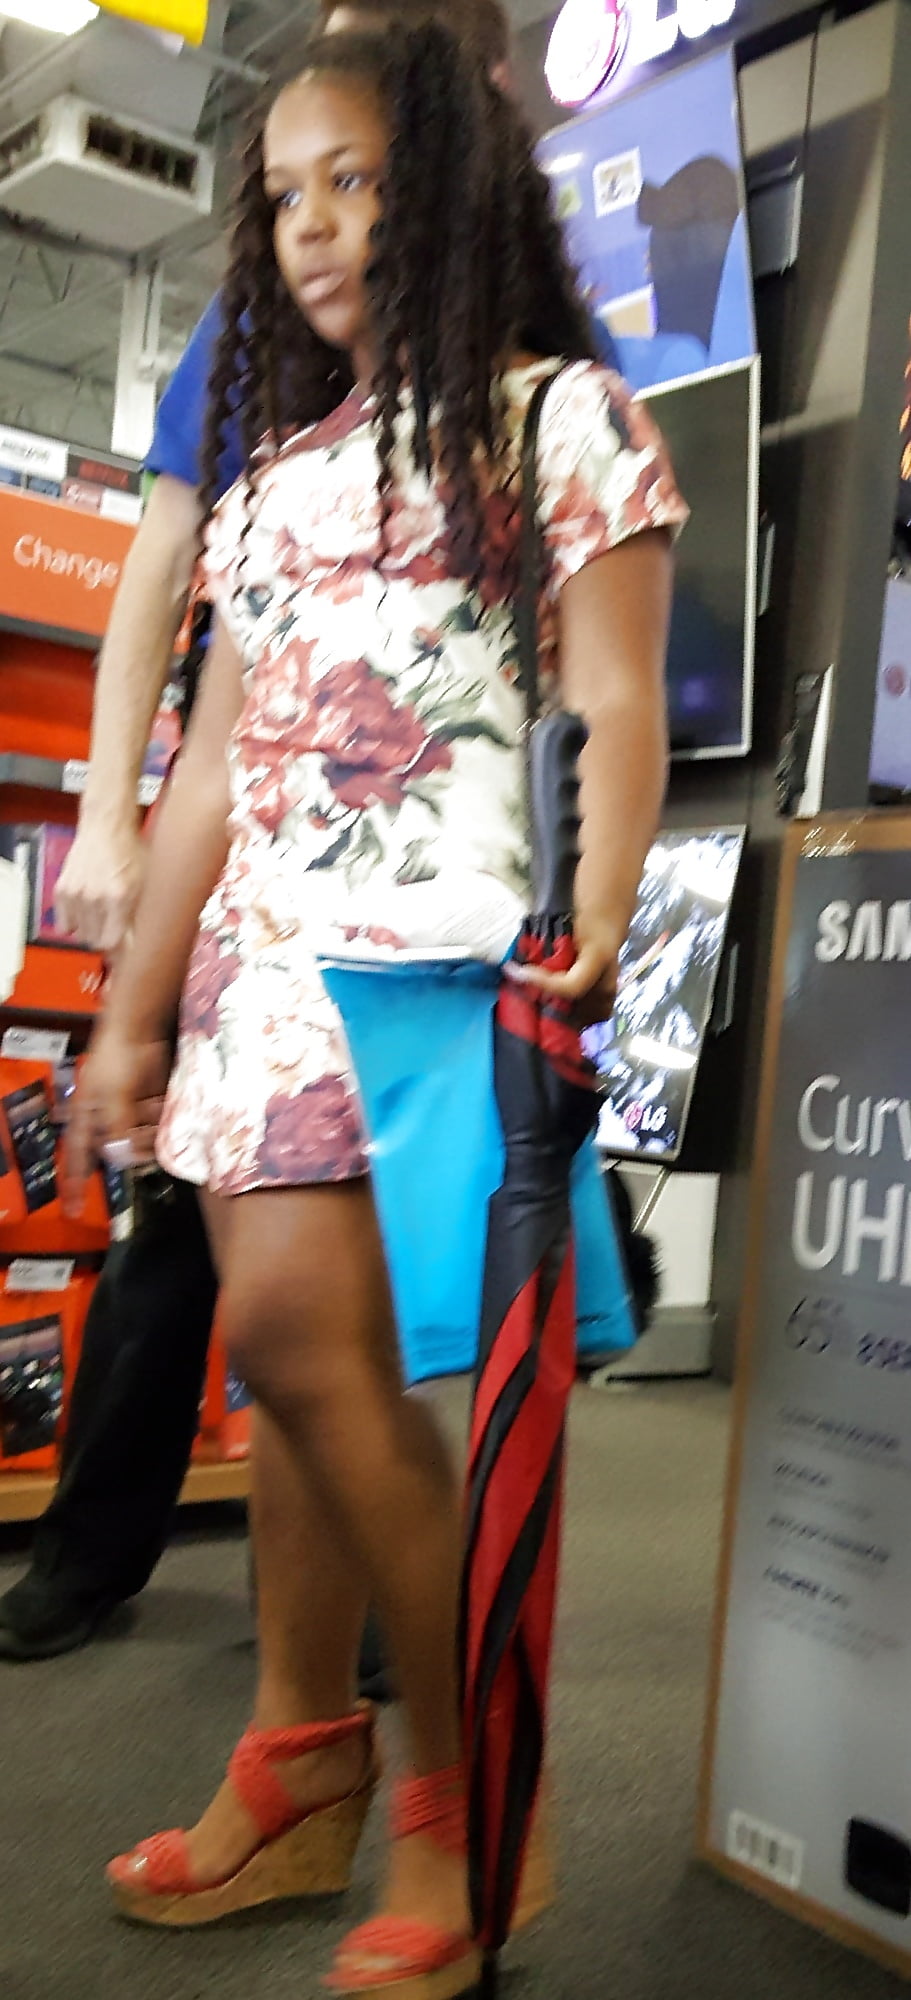 Ebony wife shopping for hubby in thot dress Creep Shots (10/18)